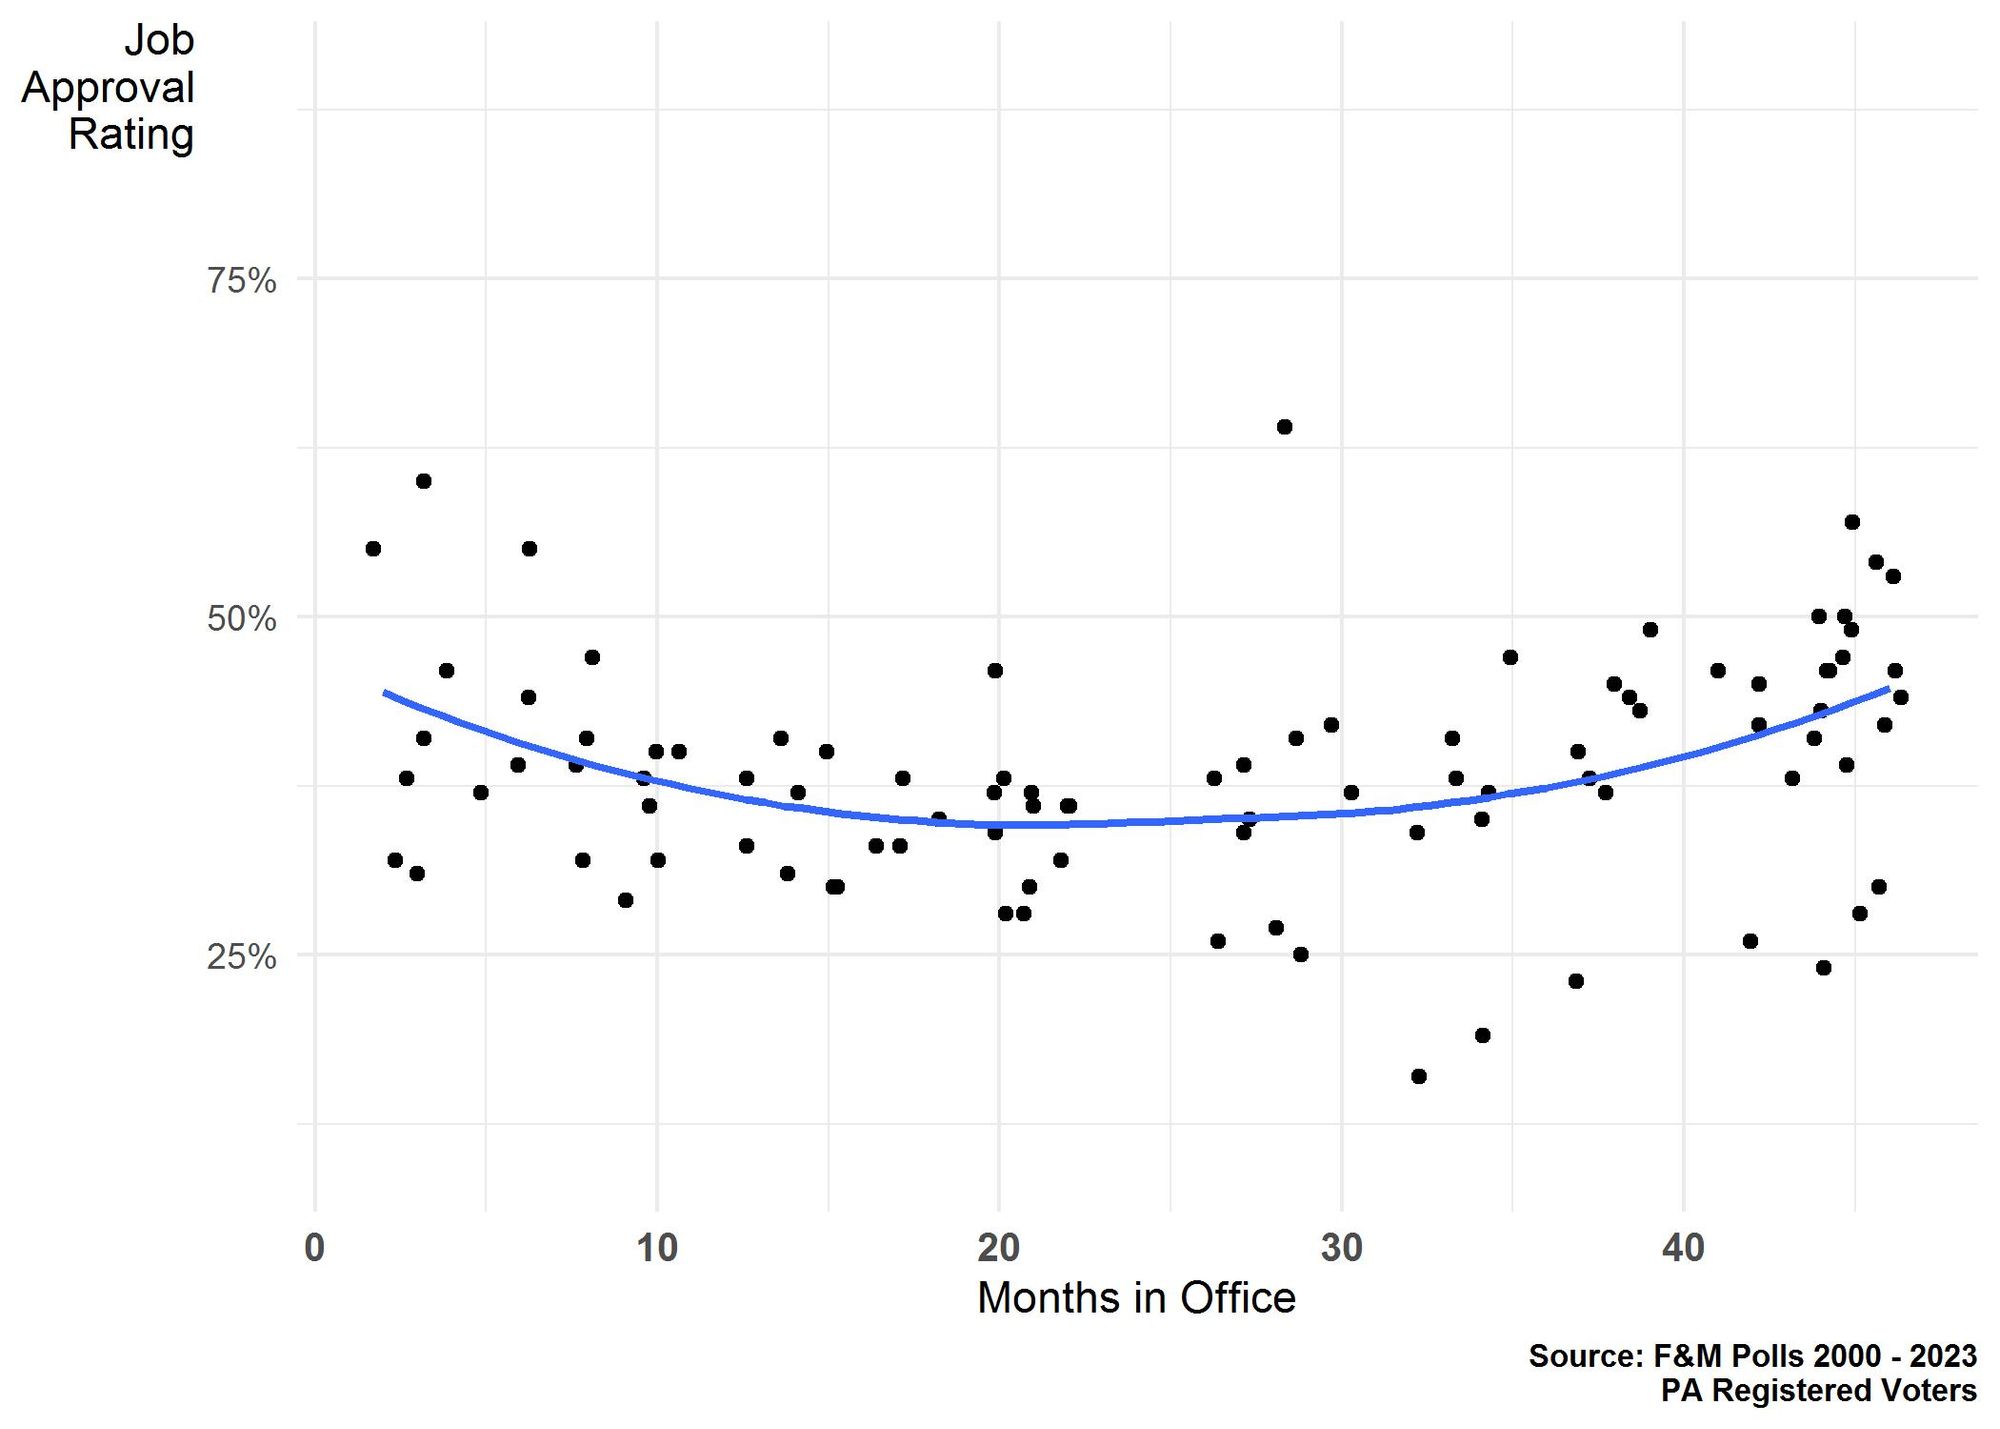 Figure 1. Scatter plot showing the positive job approval ratings for Pennsylvania governors and U.S. presidents among Pennsylvania registered voters during their first terms in office. Data from multiple Franklin & Marshall College Polls, 2000 - 2003.